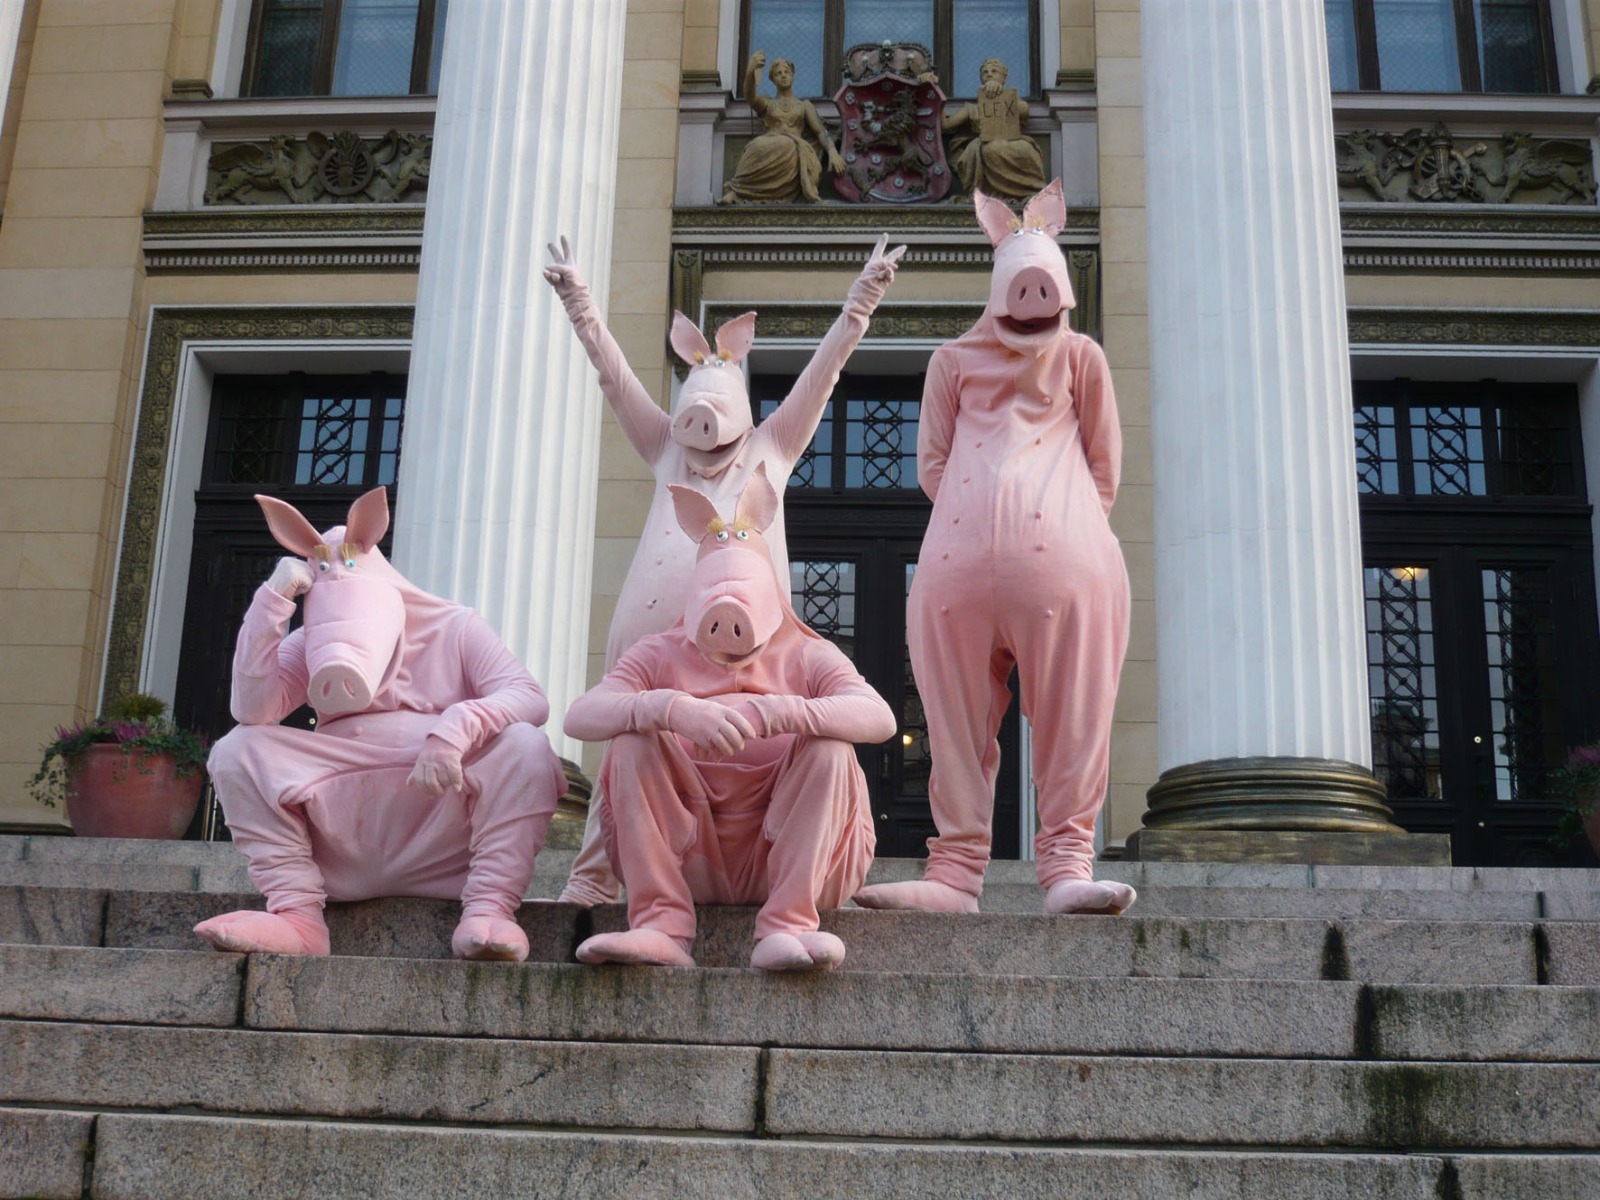 Four pigs standing or sitting on the stairs.